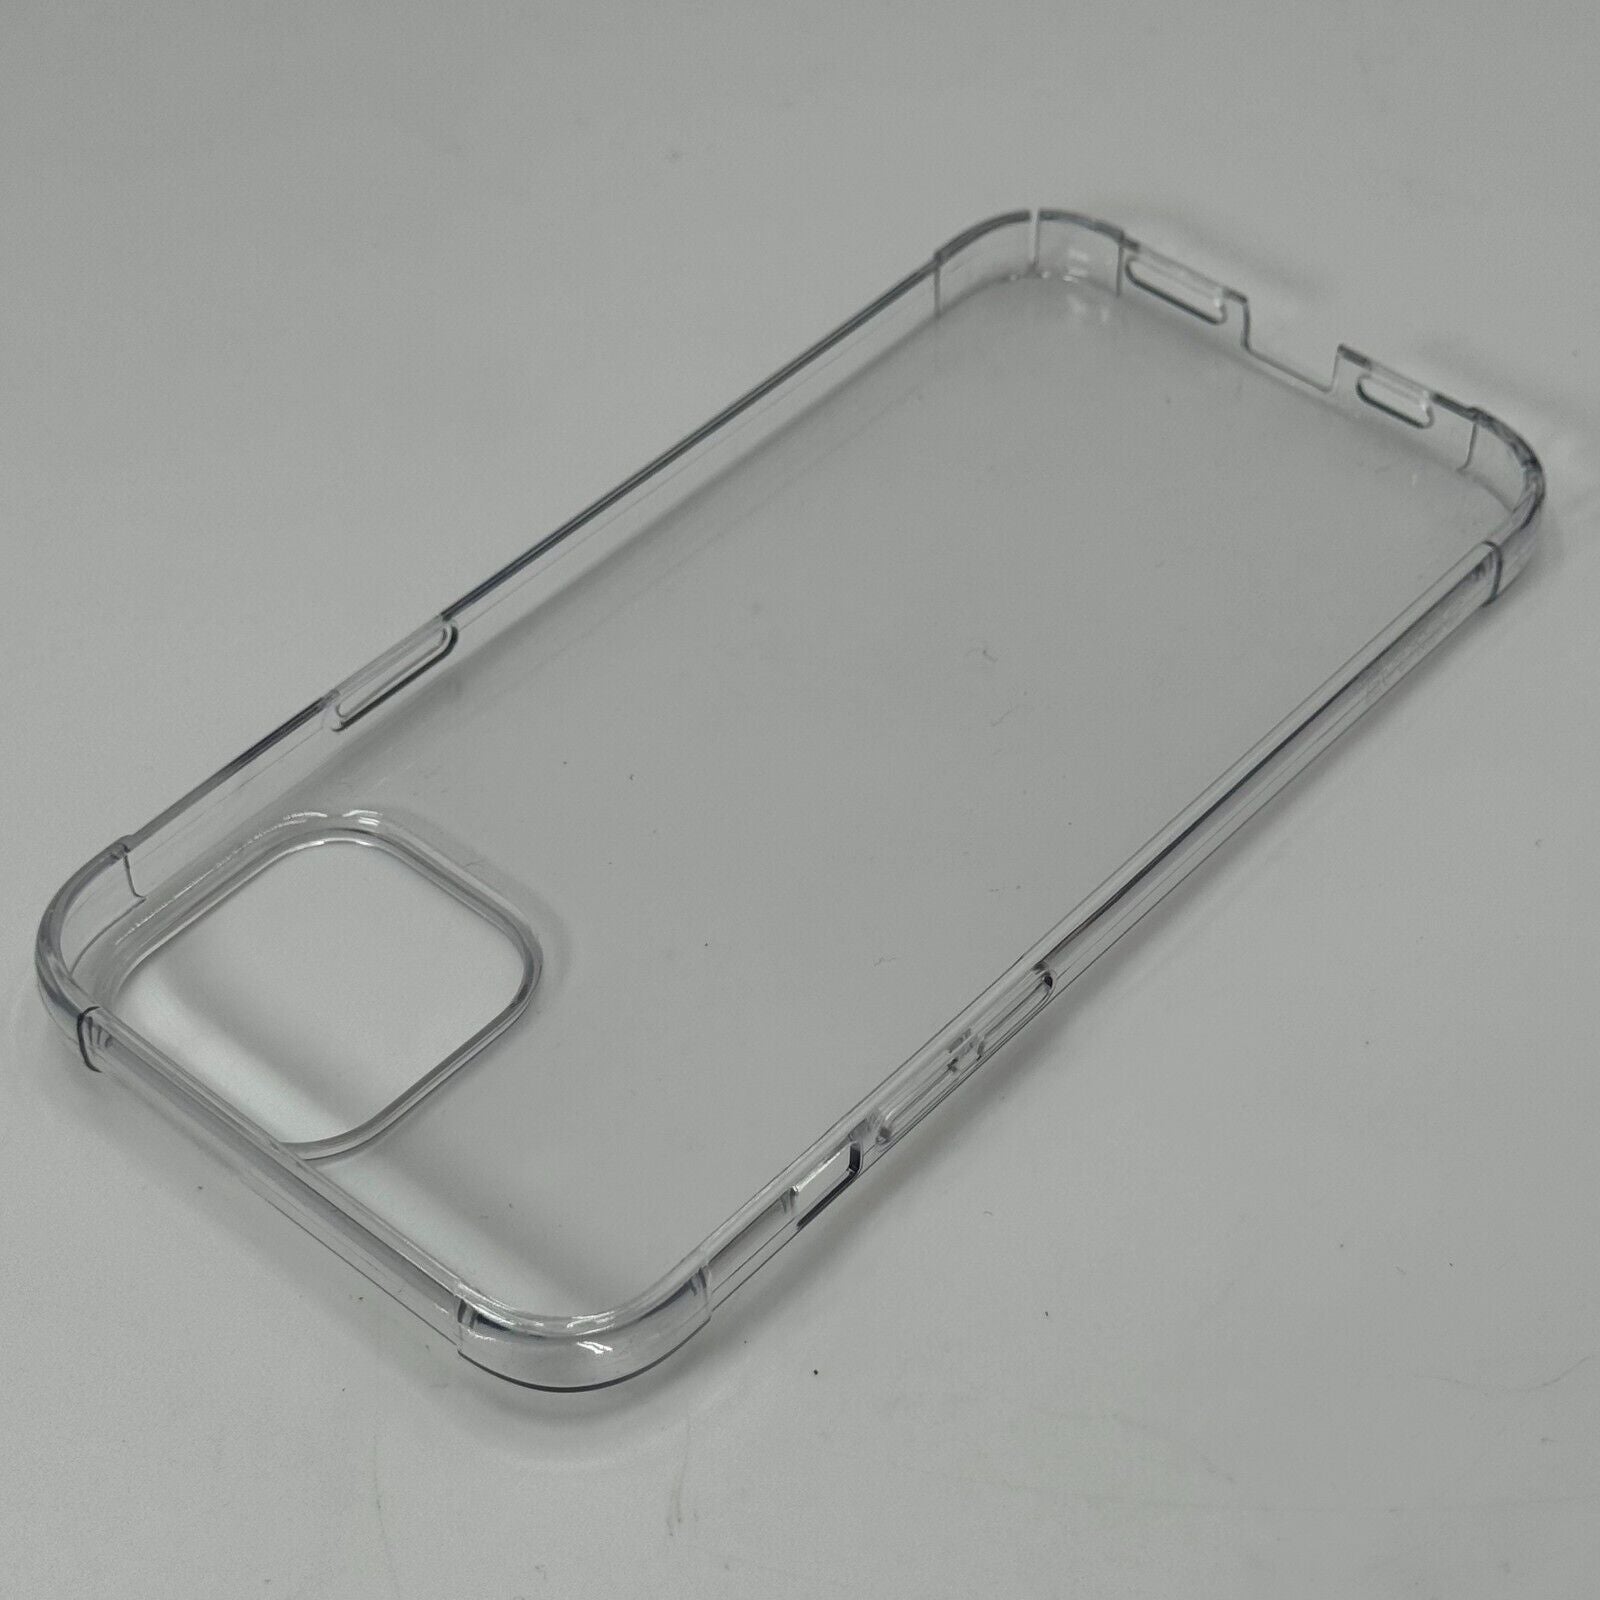 Evutec Eco Series Slim Shell Case for Apple iPhone 12 Pro Max - Clear